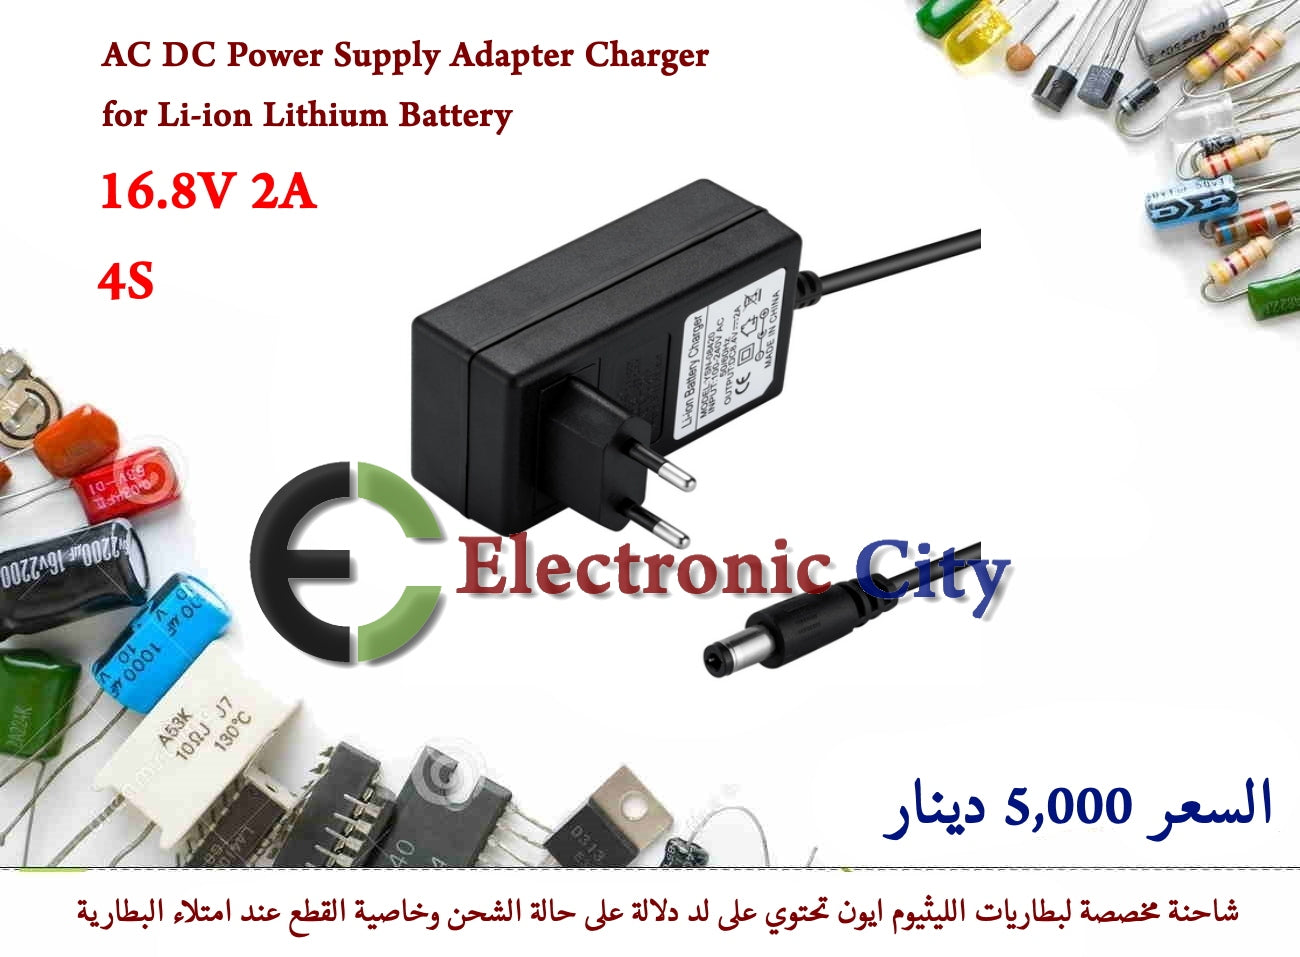 16.8V 2A AC DC Power Supply Adapter Charger for 4S Li-ion Lithium Battery